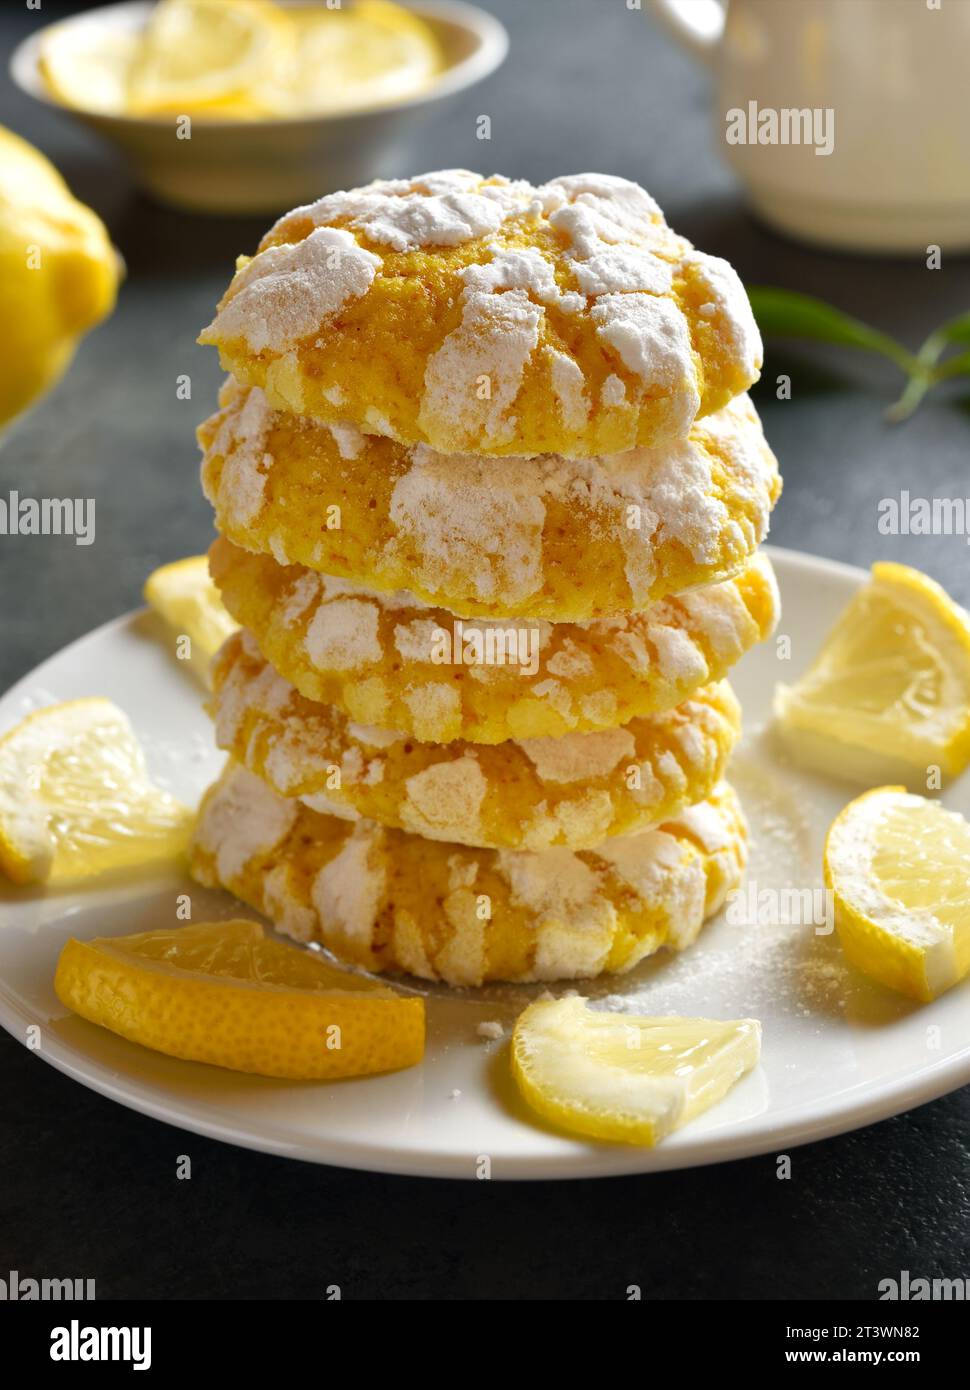 Stack of homemade lemon crinkle cookies on plate over dark stone background. Close up view Stock Photo